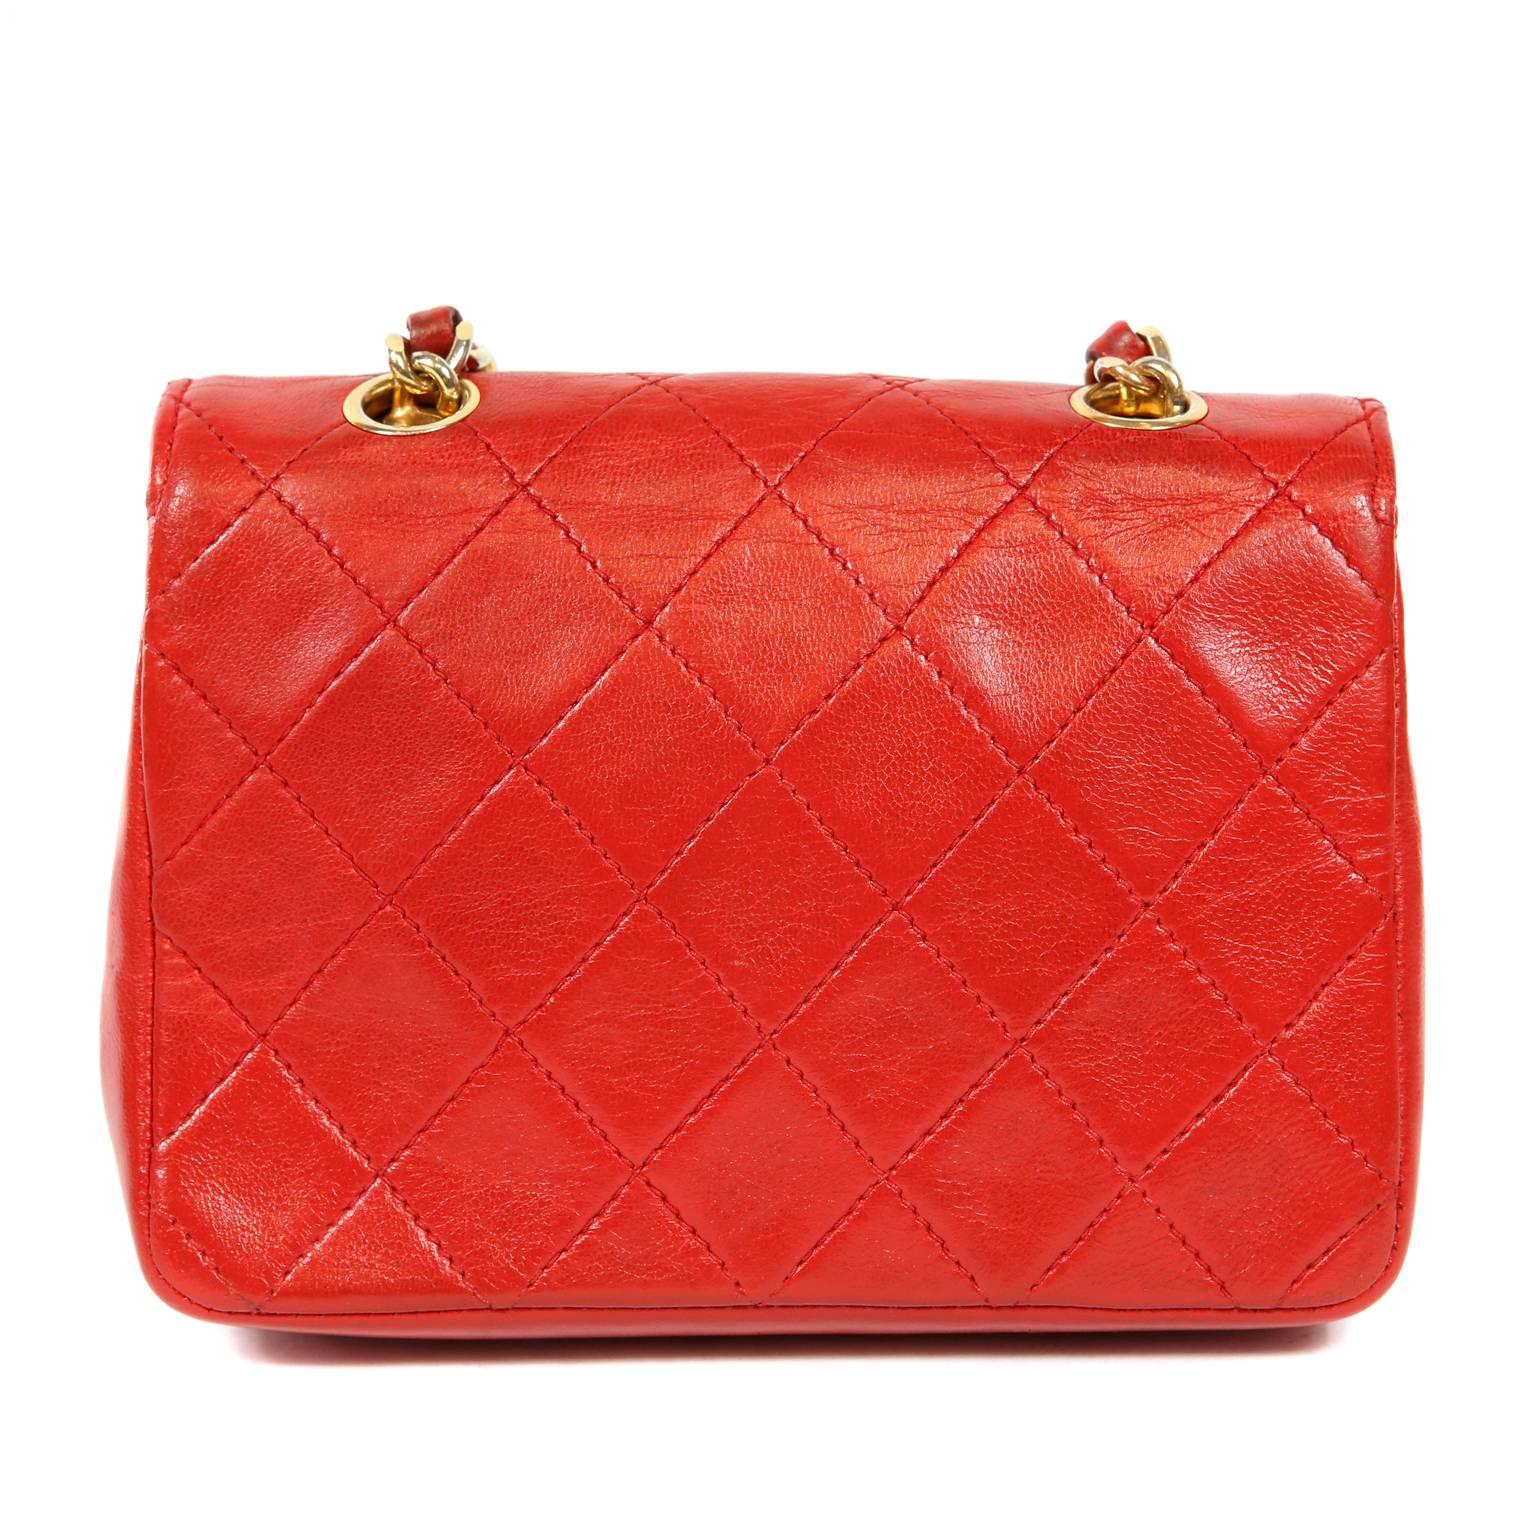 Chanel Vintage Red Leather Mini Classic- EXCELLENT PLUS Condition
  A truly stunning piece featuring a jewelry clasp depicting (what else?) a gold quilted Chanel flap bag.
Lipstick red leather is quilted in signature Chanel diamond pattern.  Gold